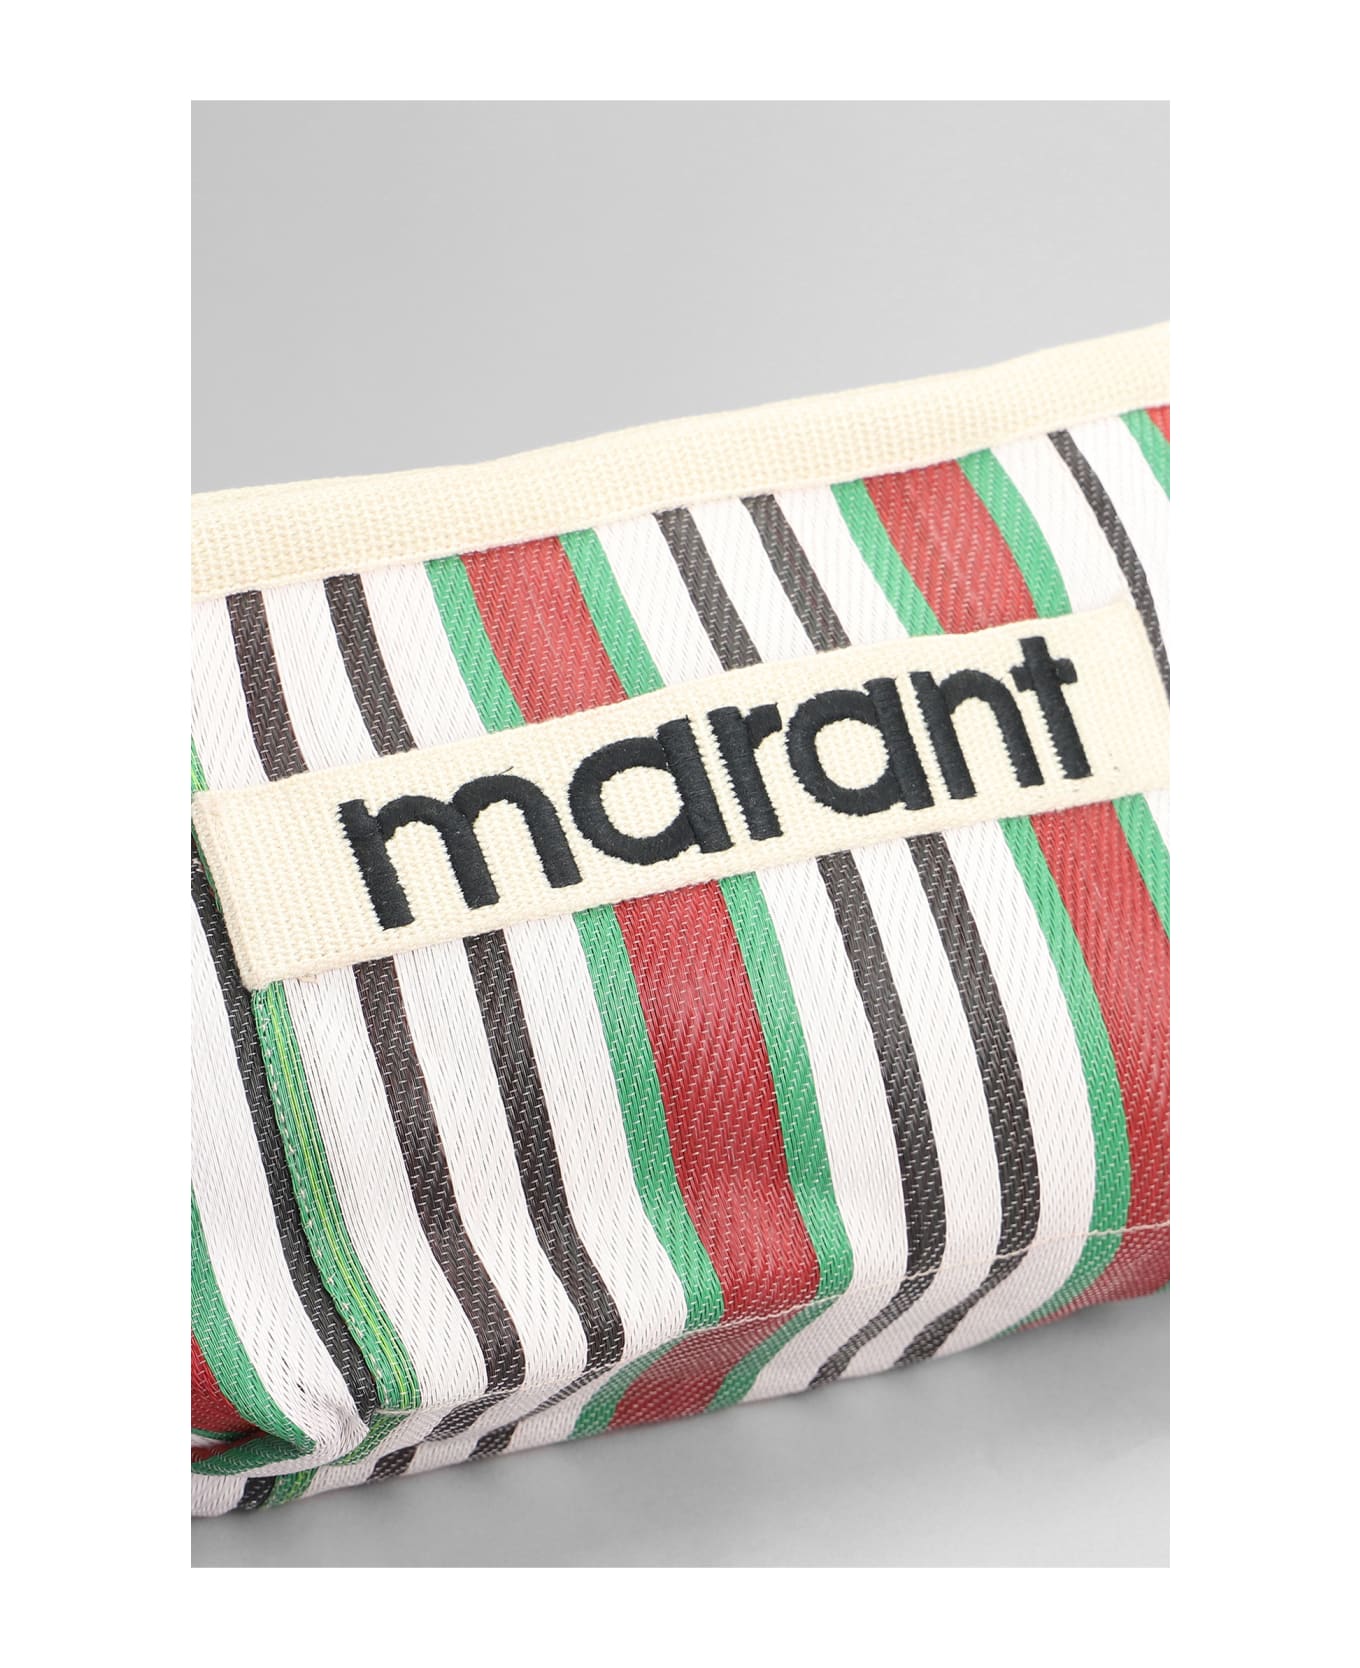 Isabel Marant Powden Clutch In Multicolor Nylon - RED